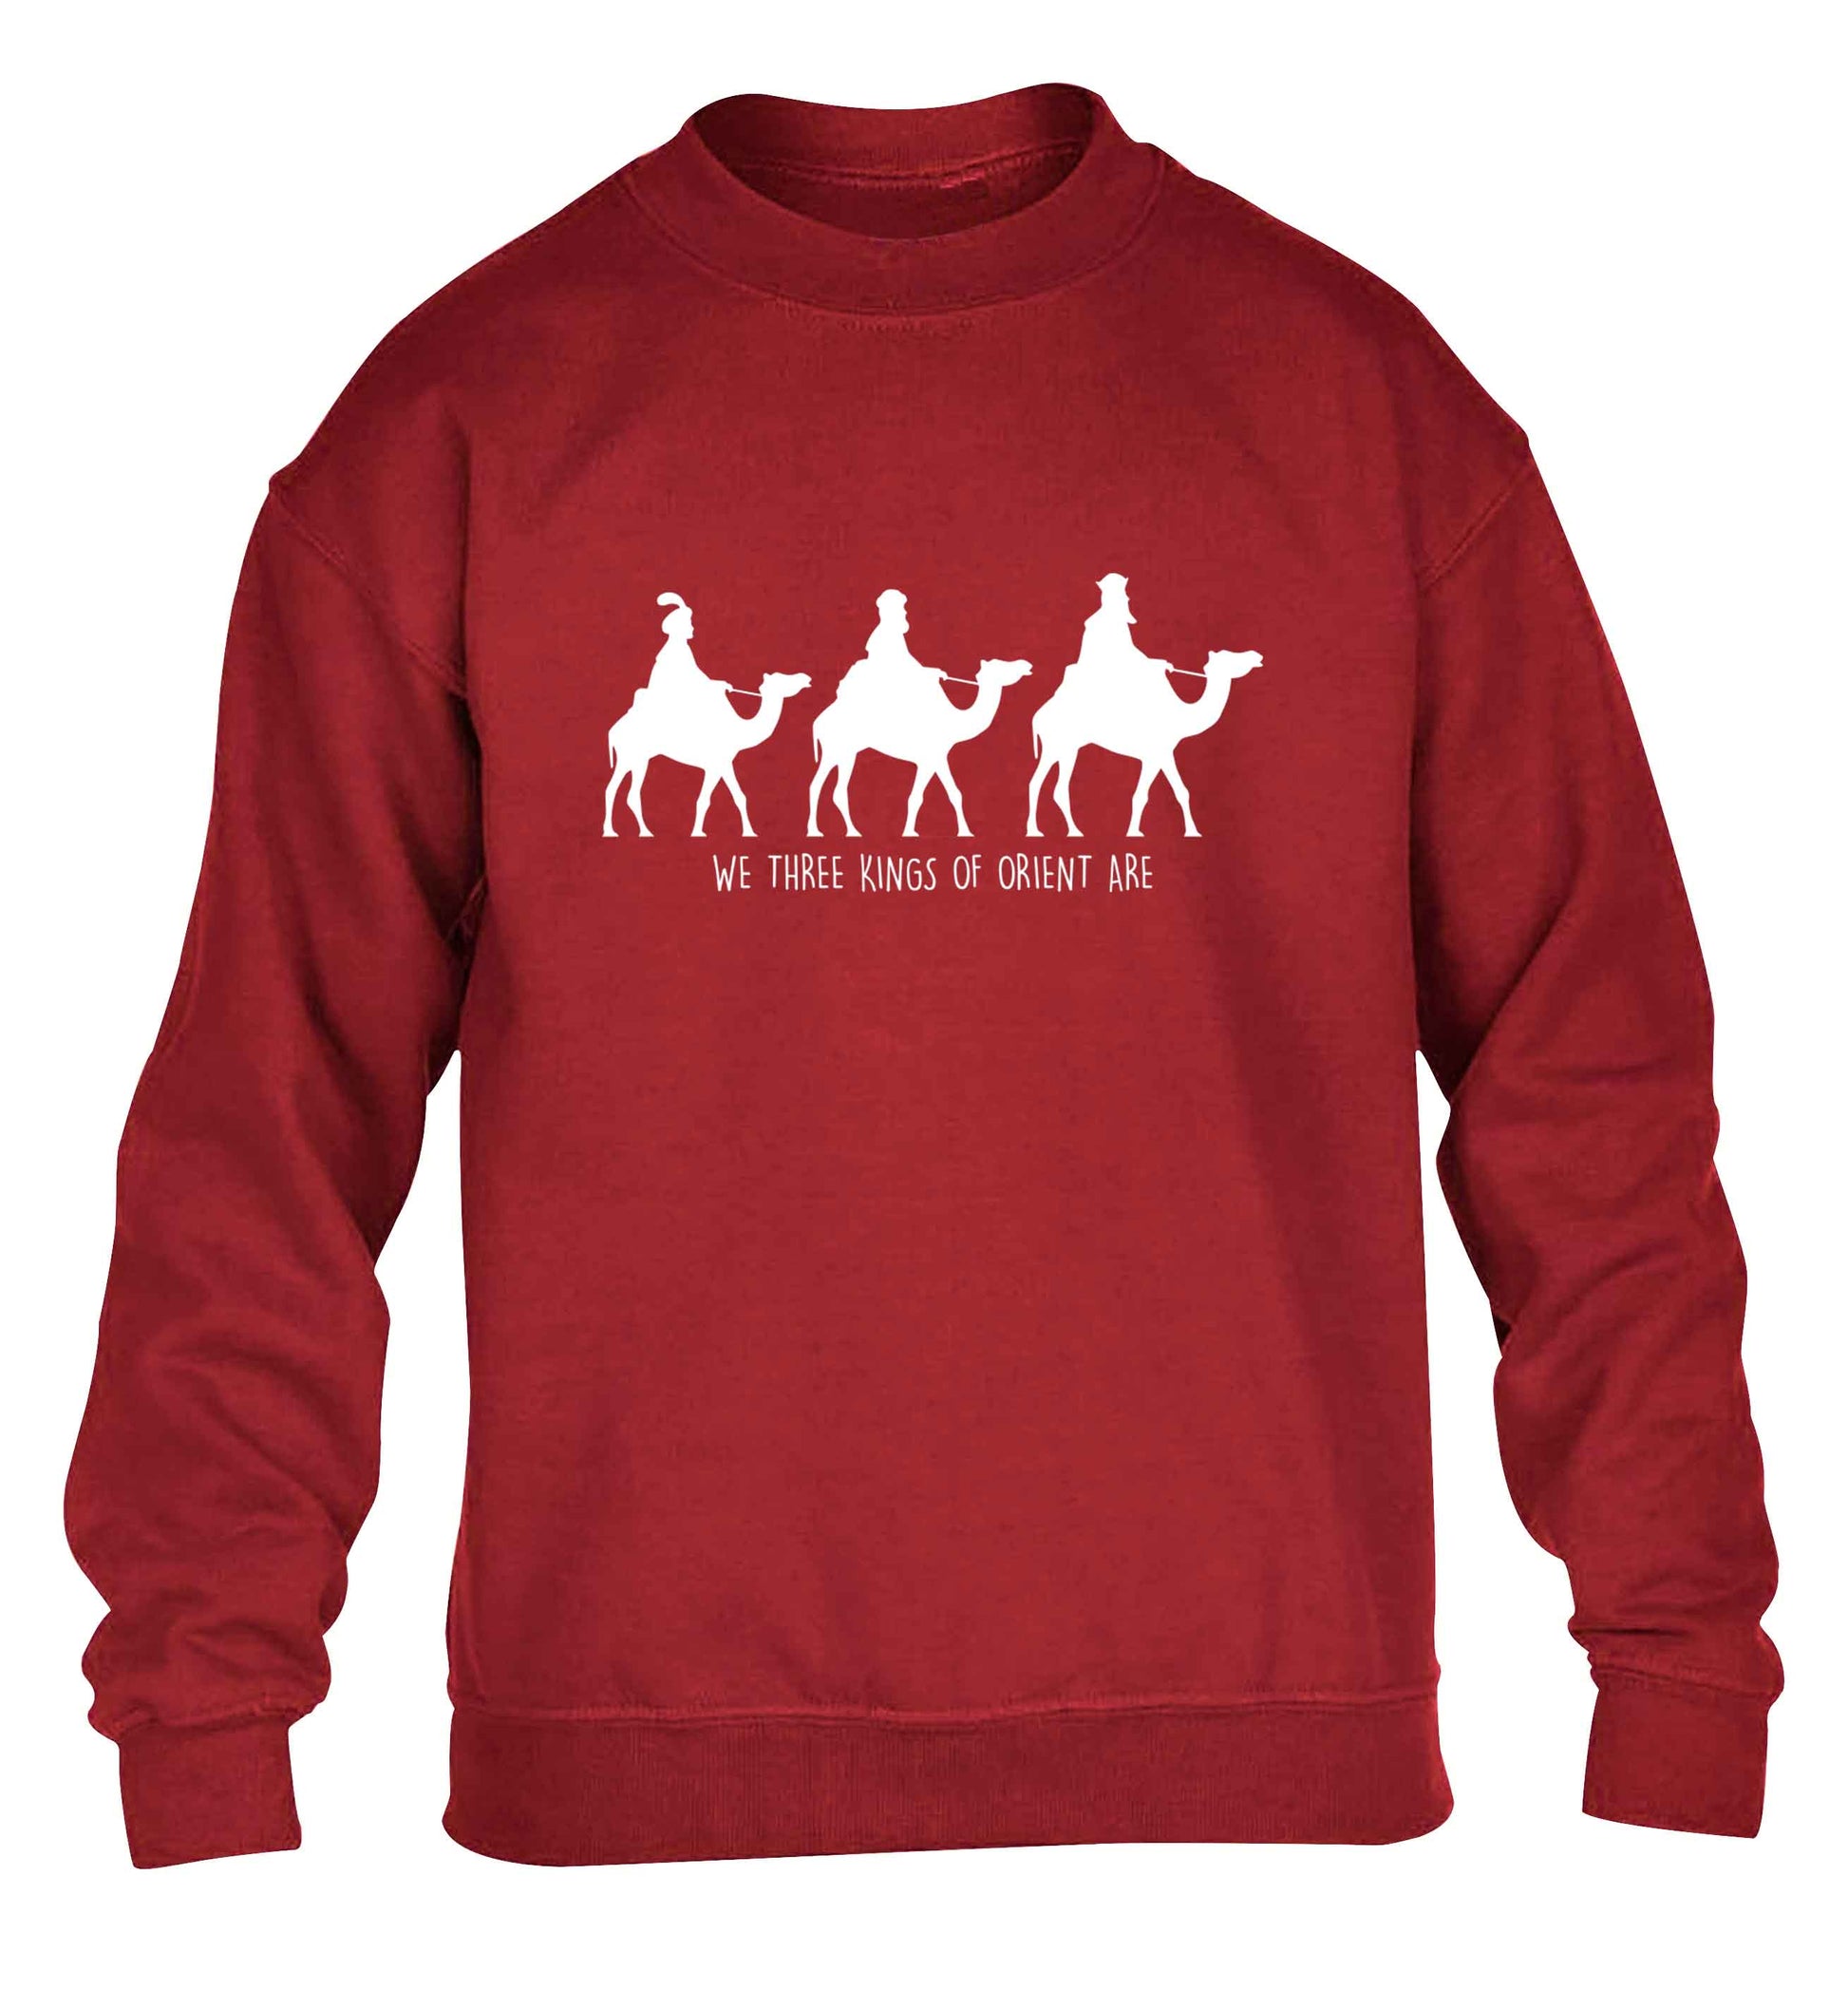 We three kings of orient are children's grey sweater 12-13 Years